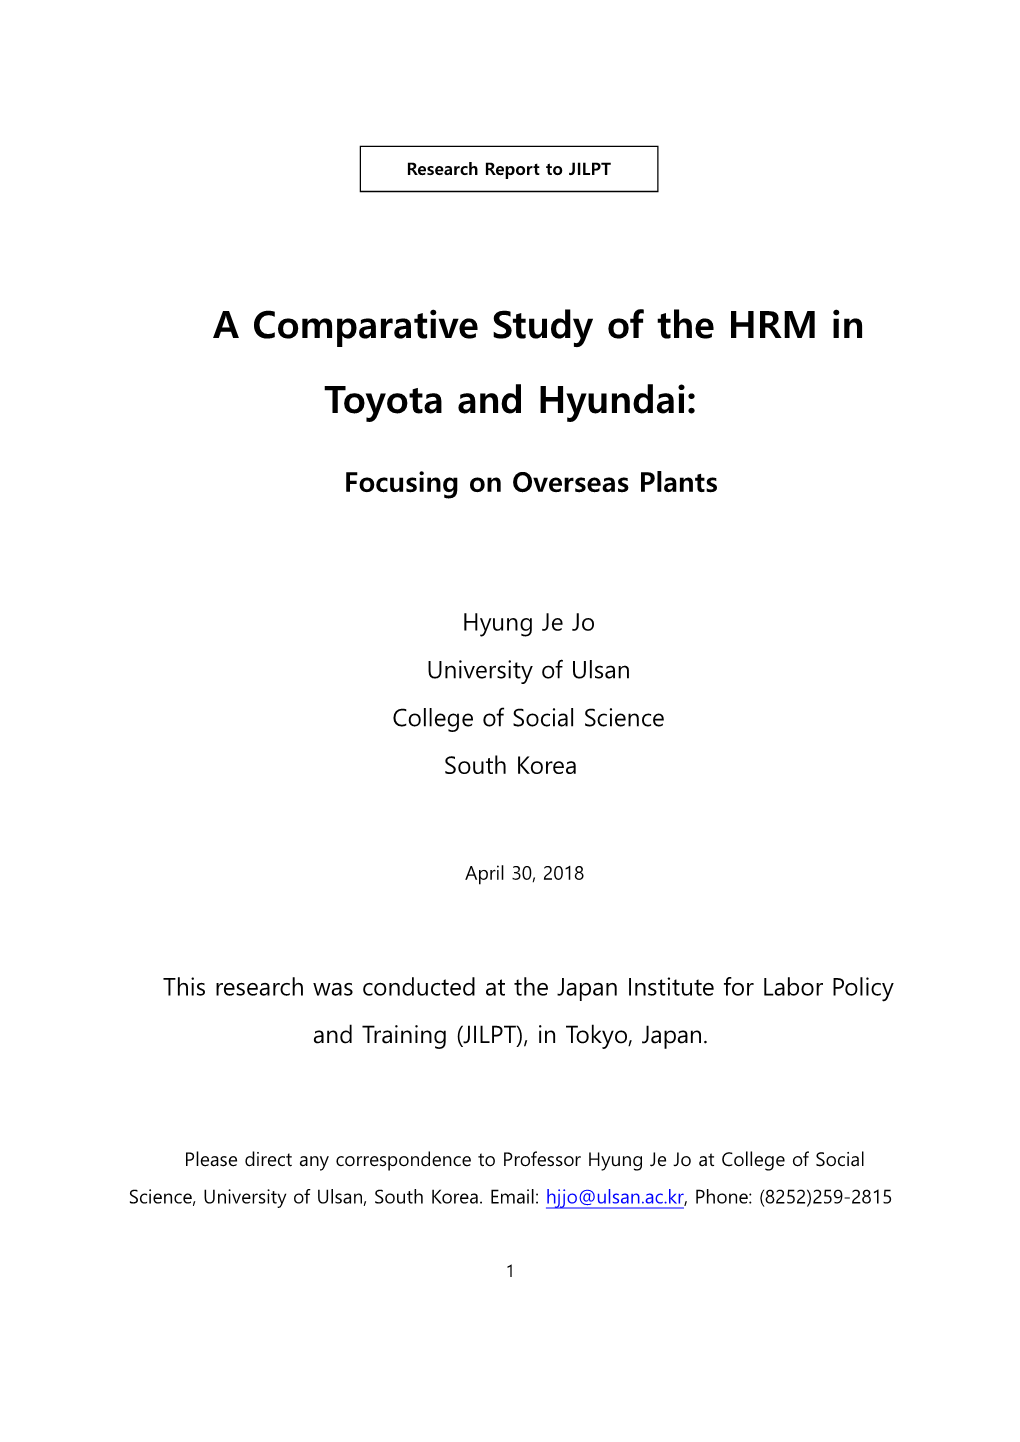 A Comparative Study of the HRM in Toyota and Hyundai